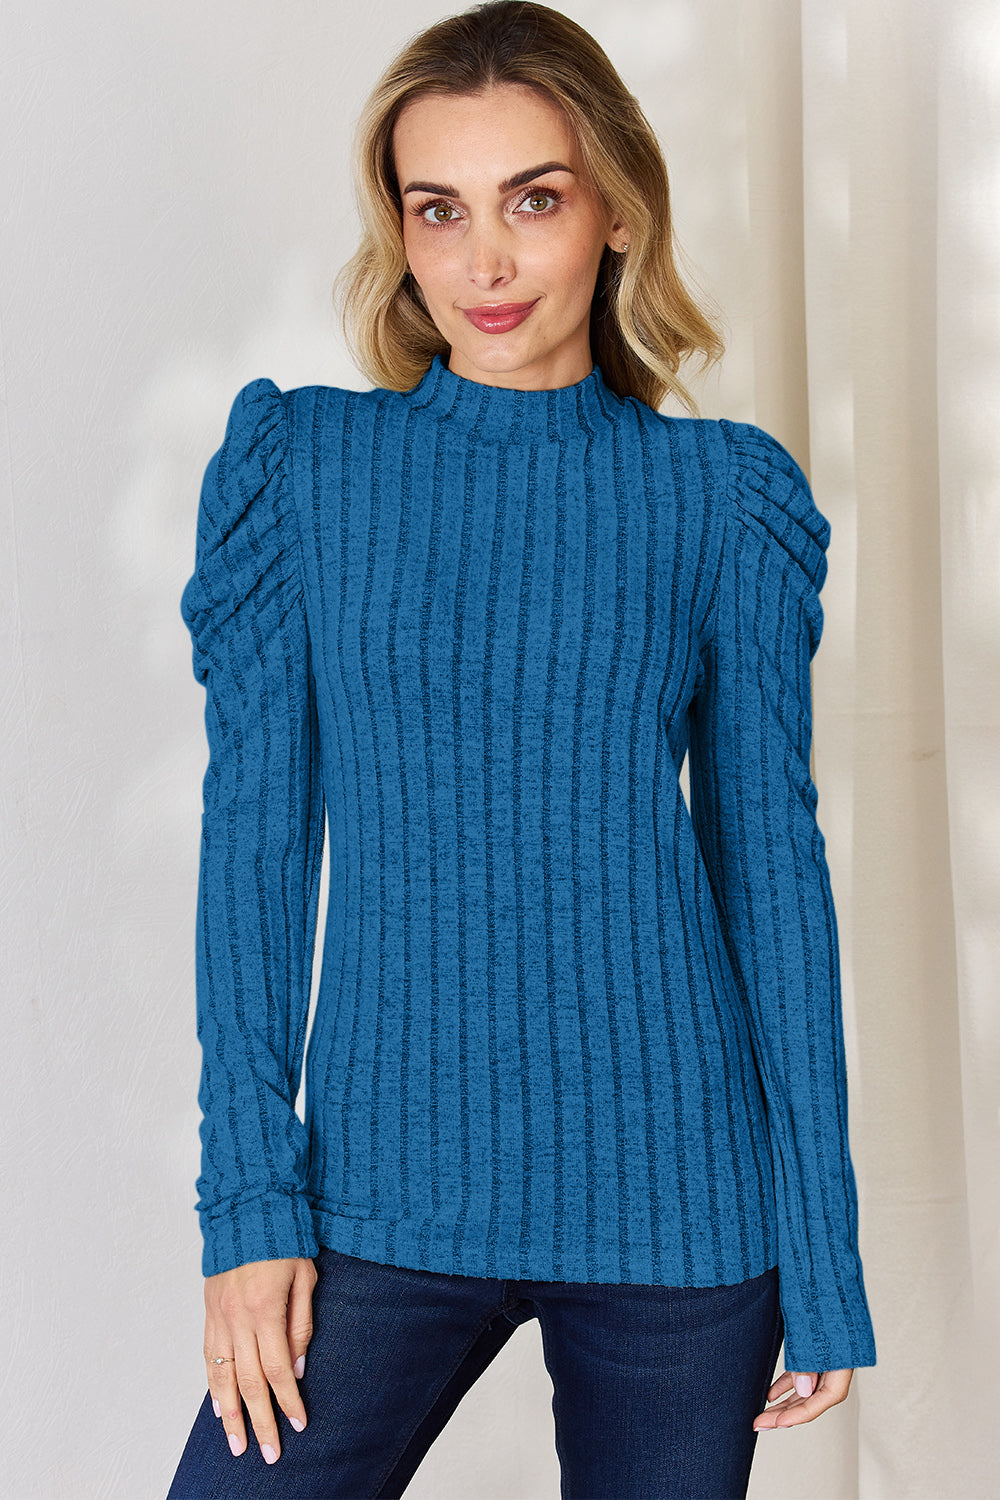 Ribbed Mock Neck Puff Sleeve Sweater